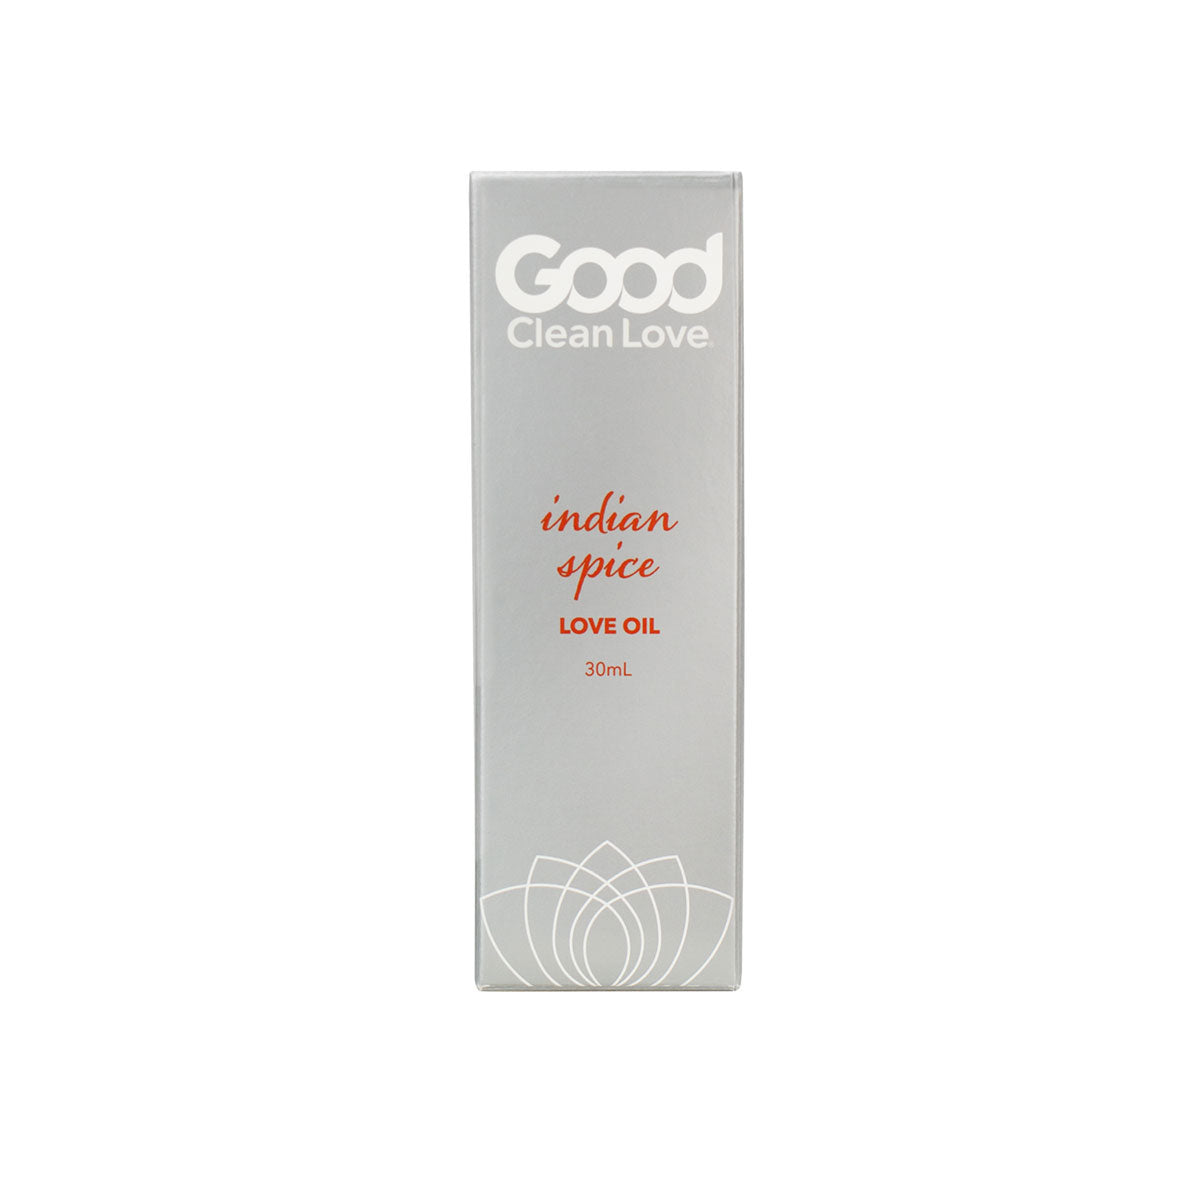 Good Clean Love Oil - Indian Spice